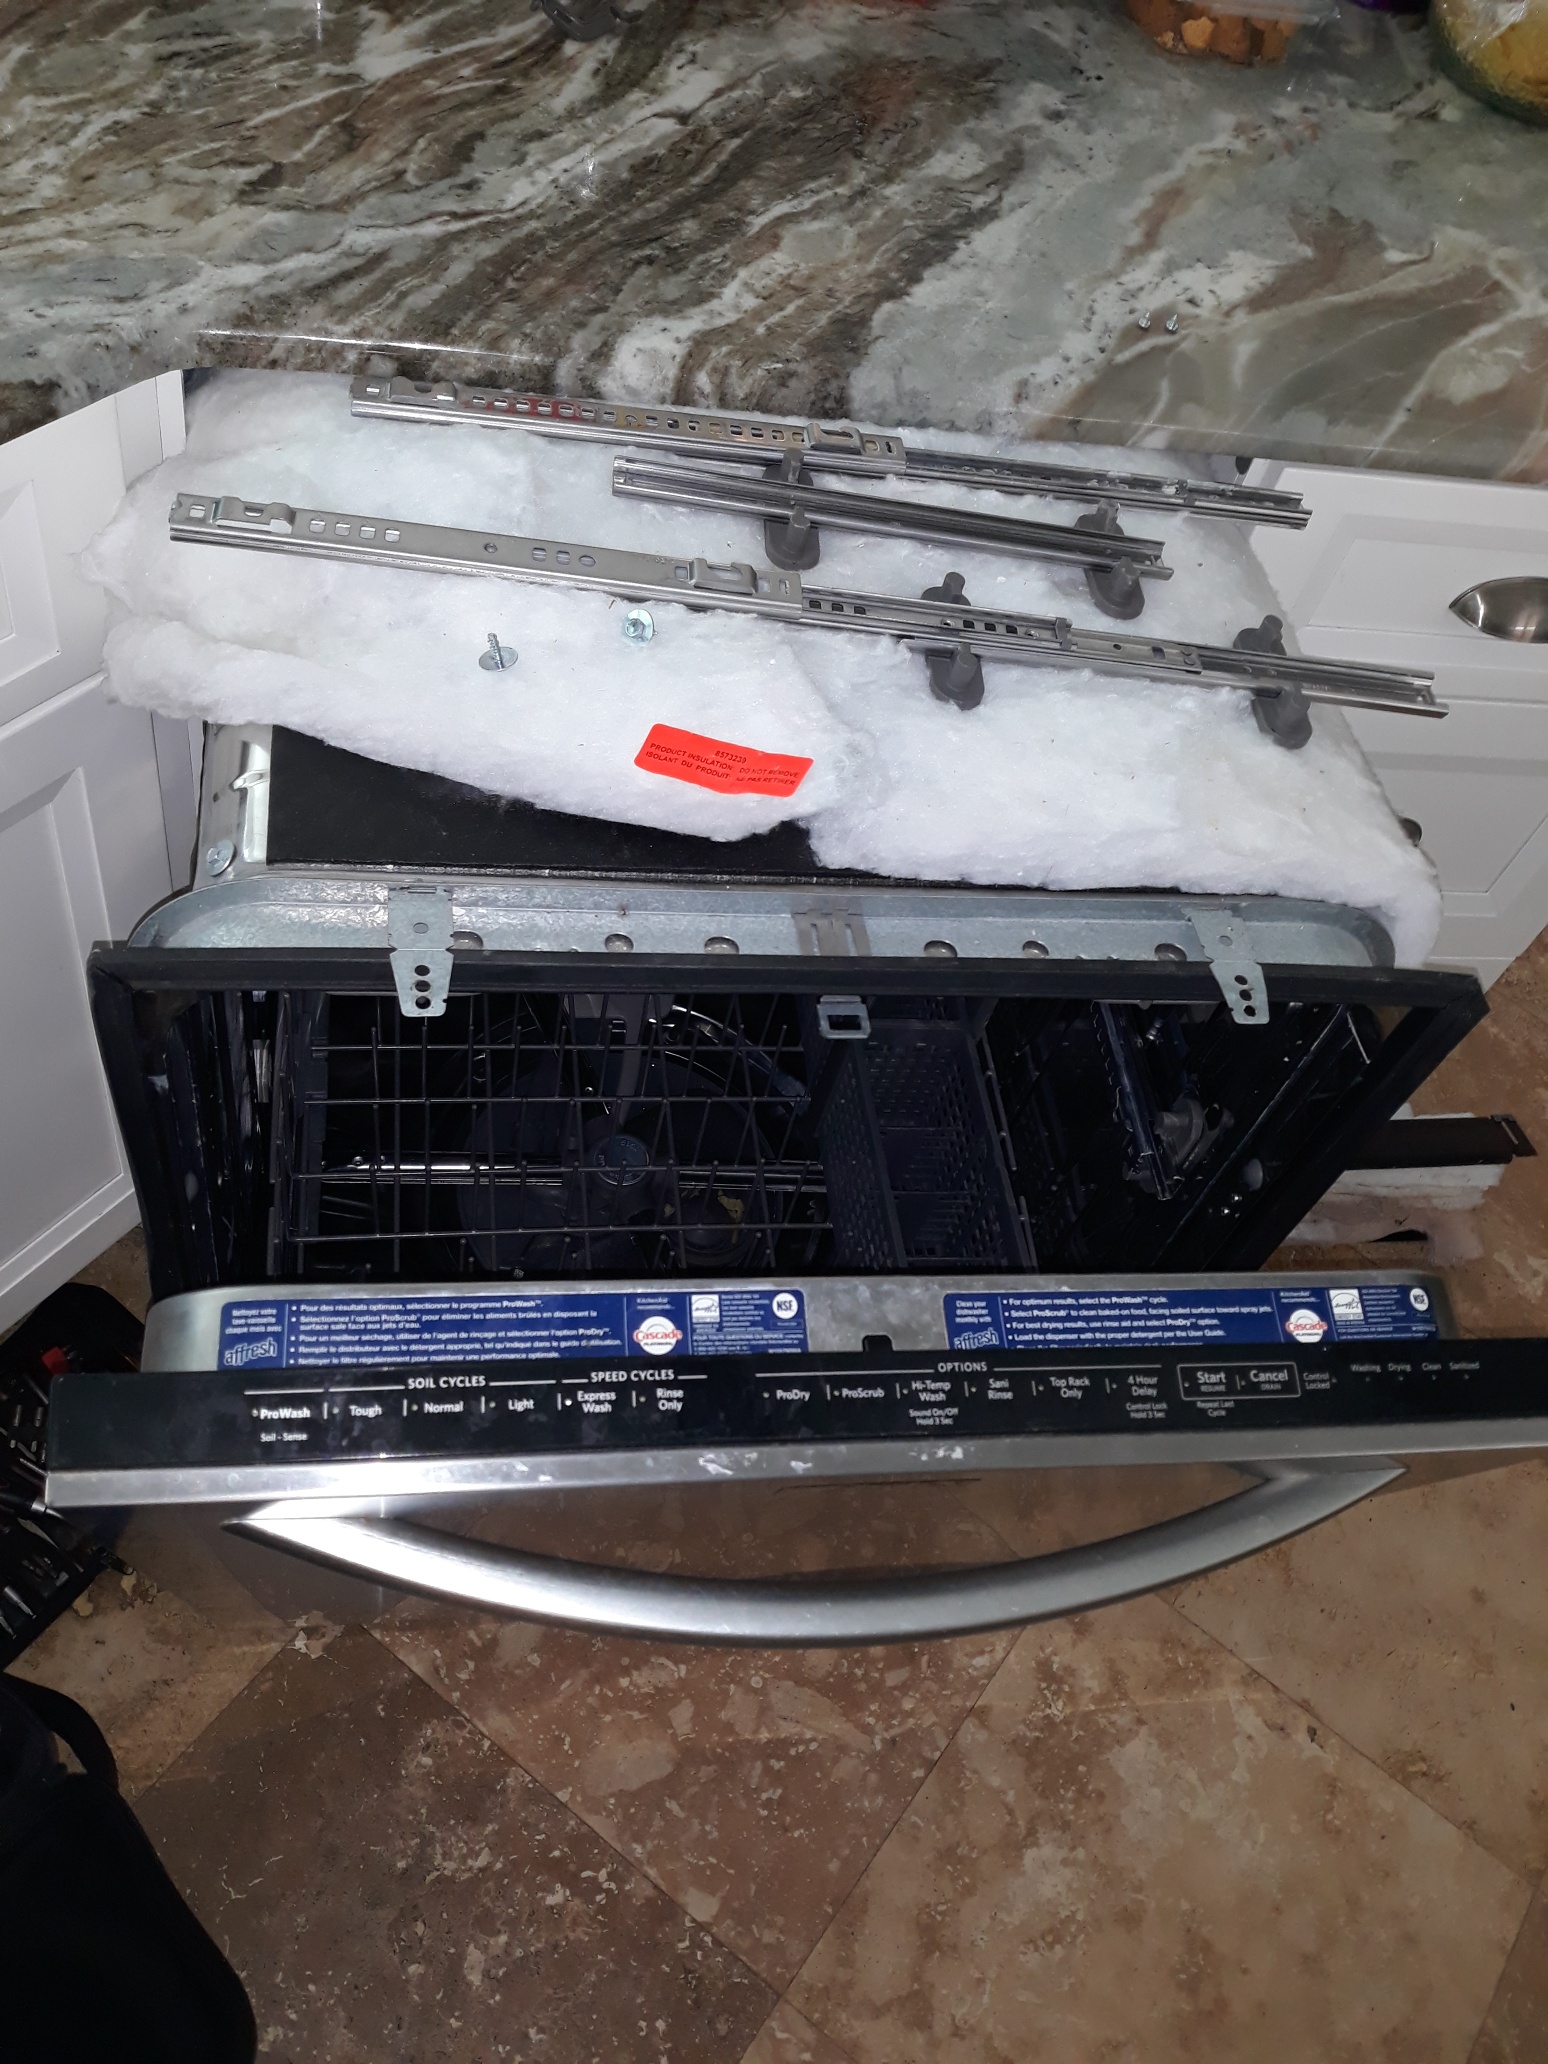 appliance repair dishwasher repair repaired by replacement of the broken and missing parts to remount the rack and restore the rack assessory components main avenue okahumpka fl 34762